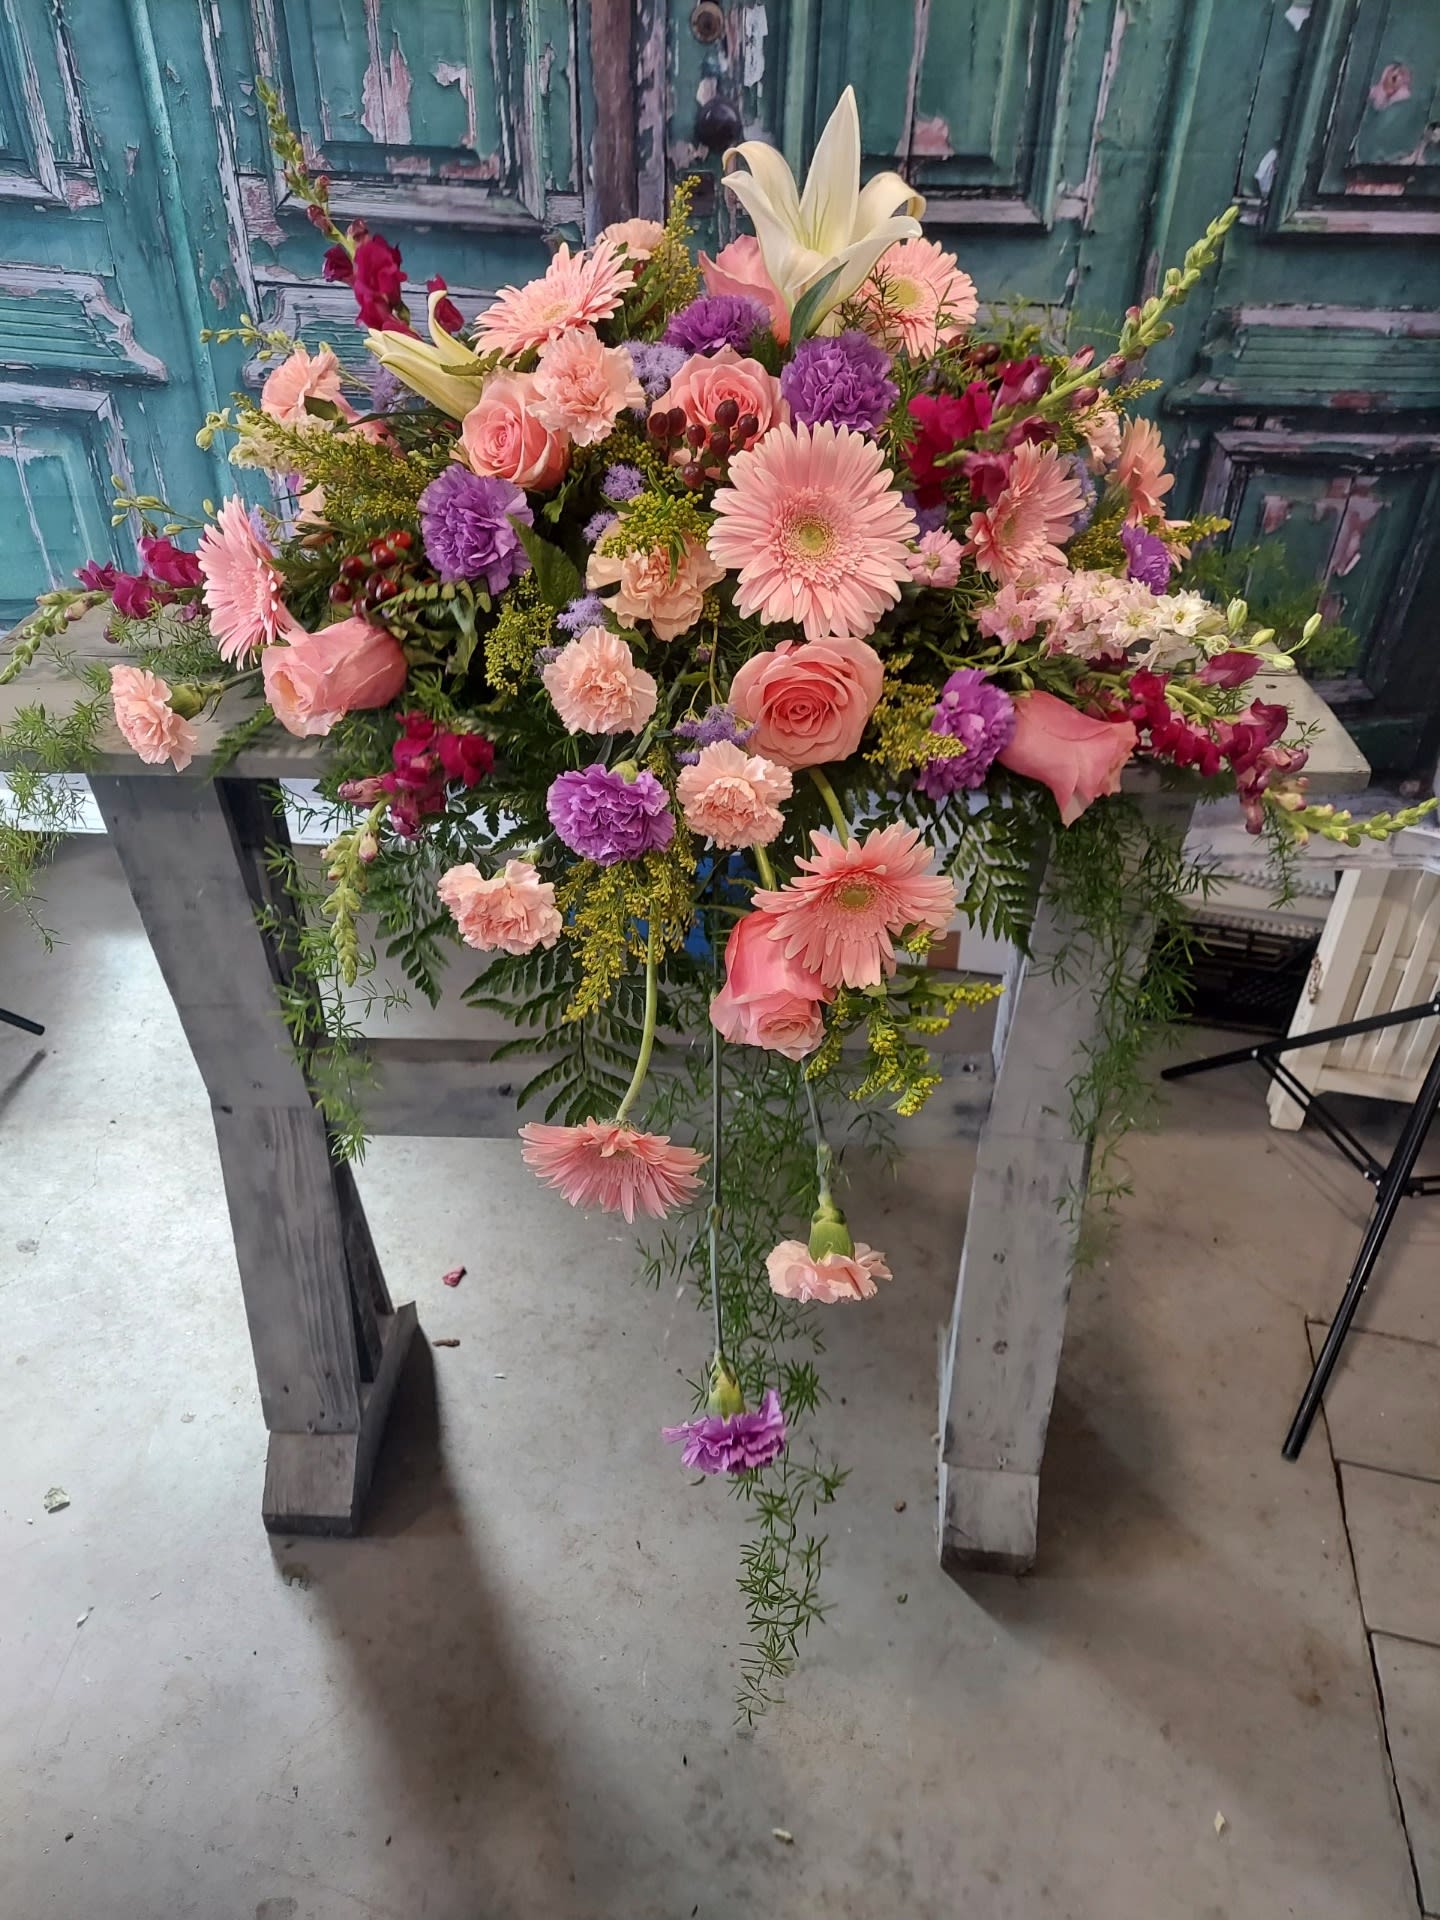 Simply Comfort - Soft pinks and greens in an impressive selection of mixed blooms and textured greens creates a classic yet sophisticated casket cover for your loved one.  